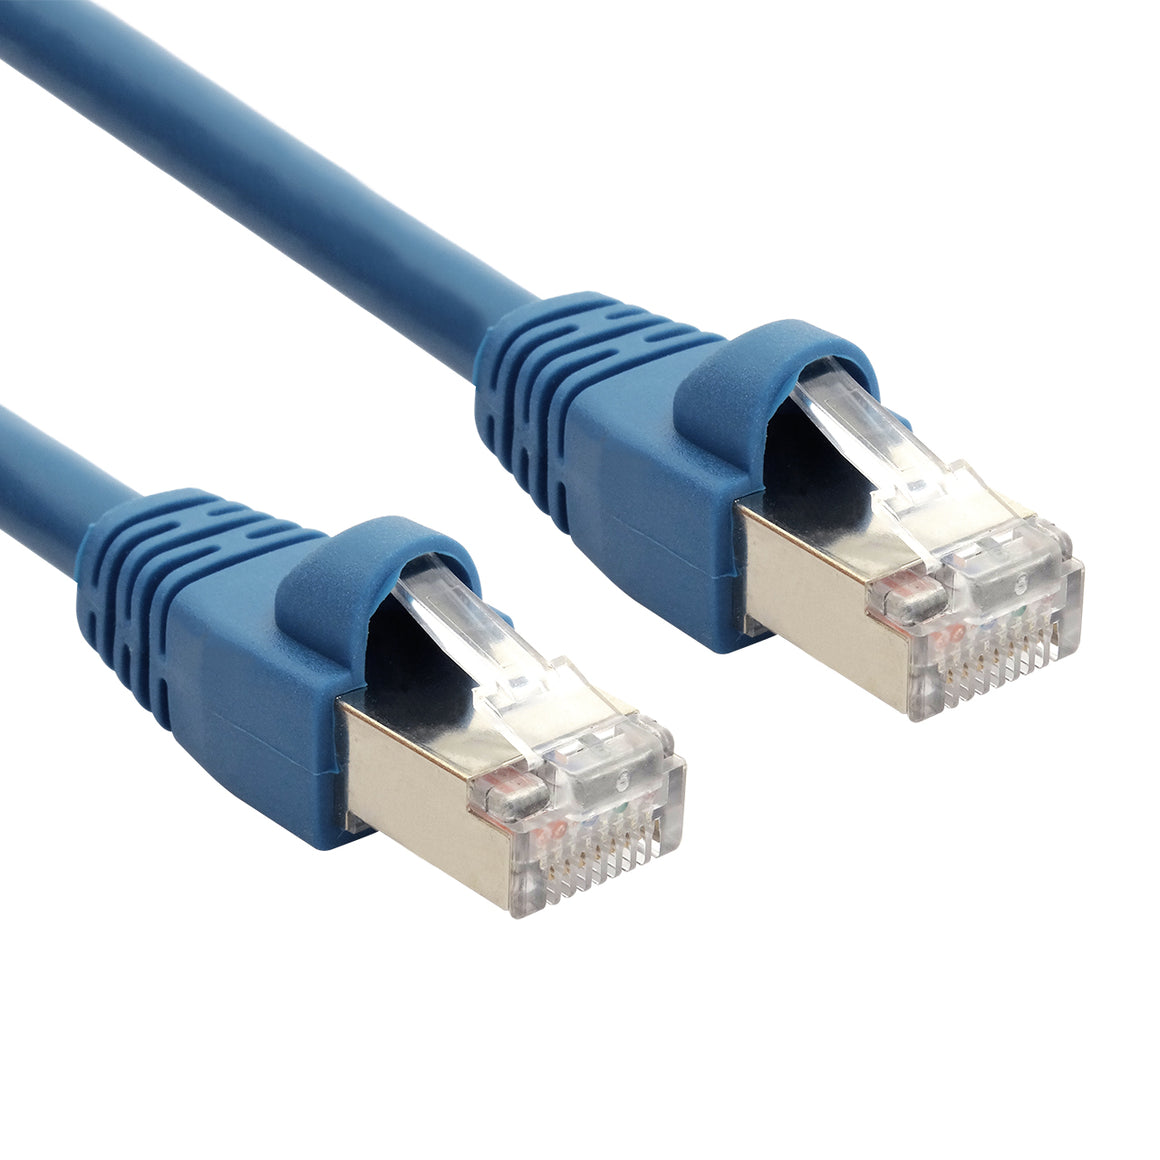 Blue RJ45 CAT 6A Ethernet Network Patch Cable Gold Plated STP